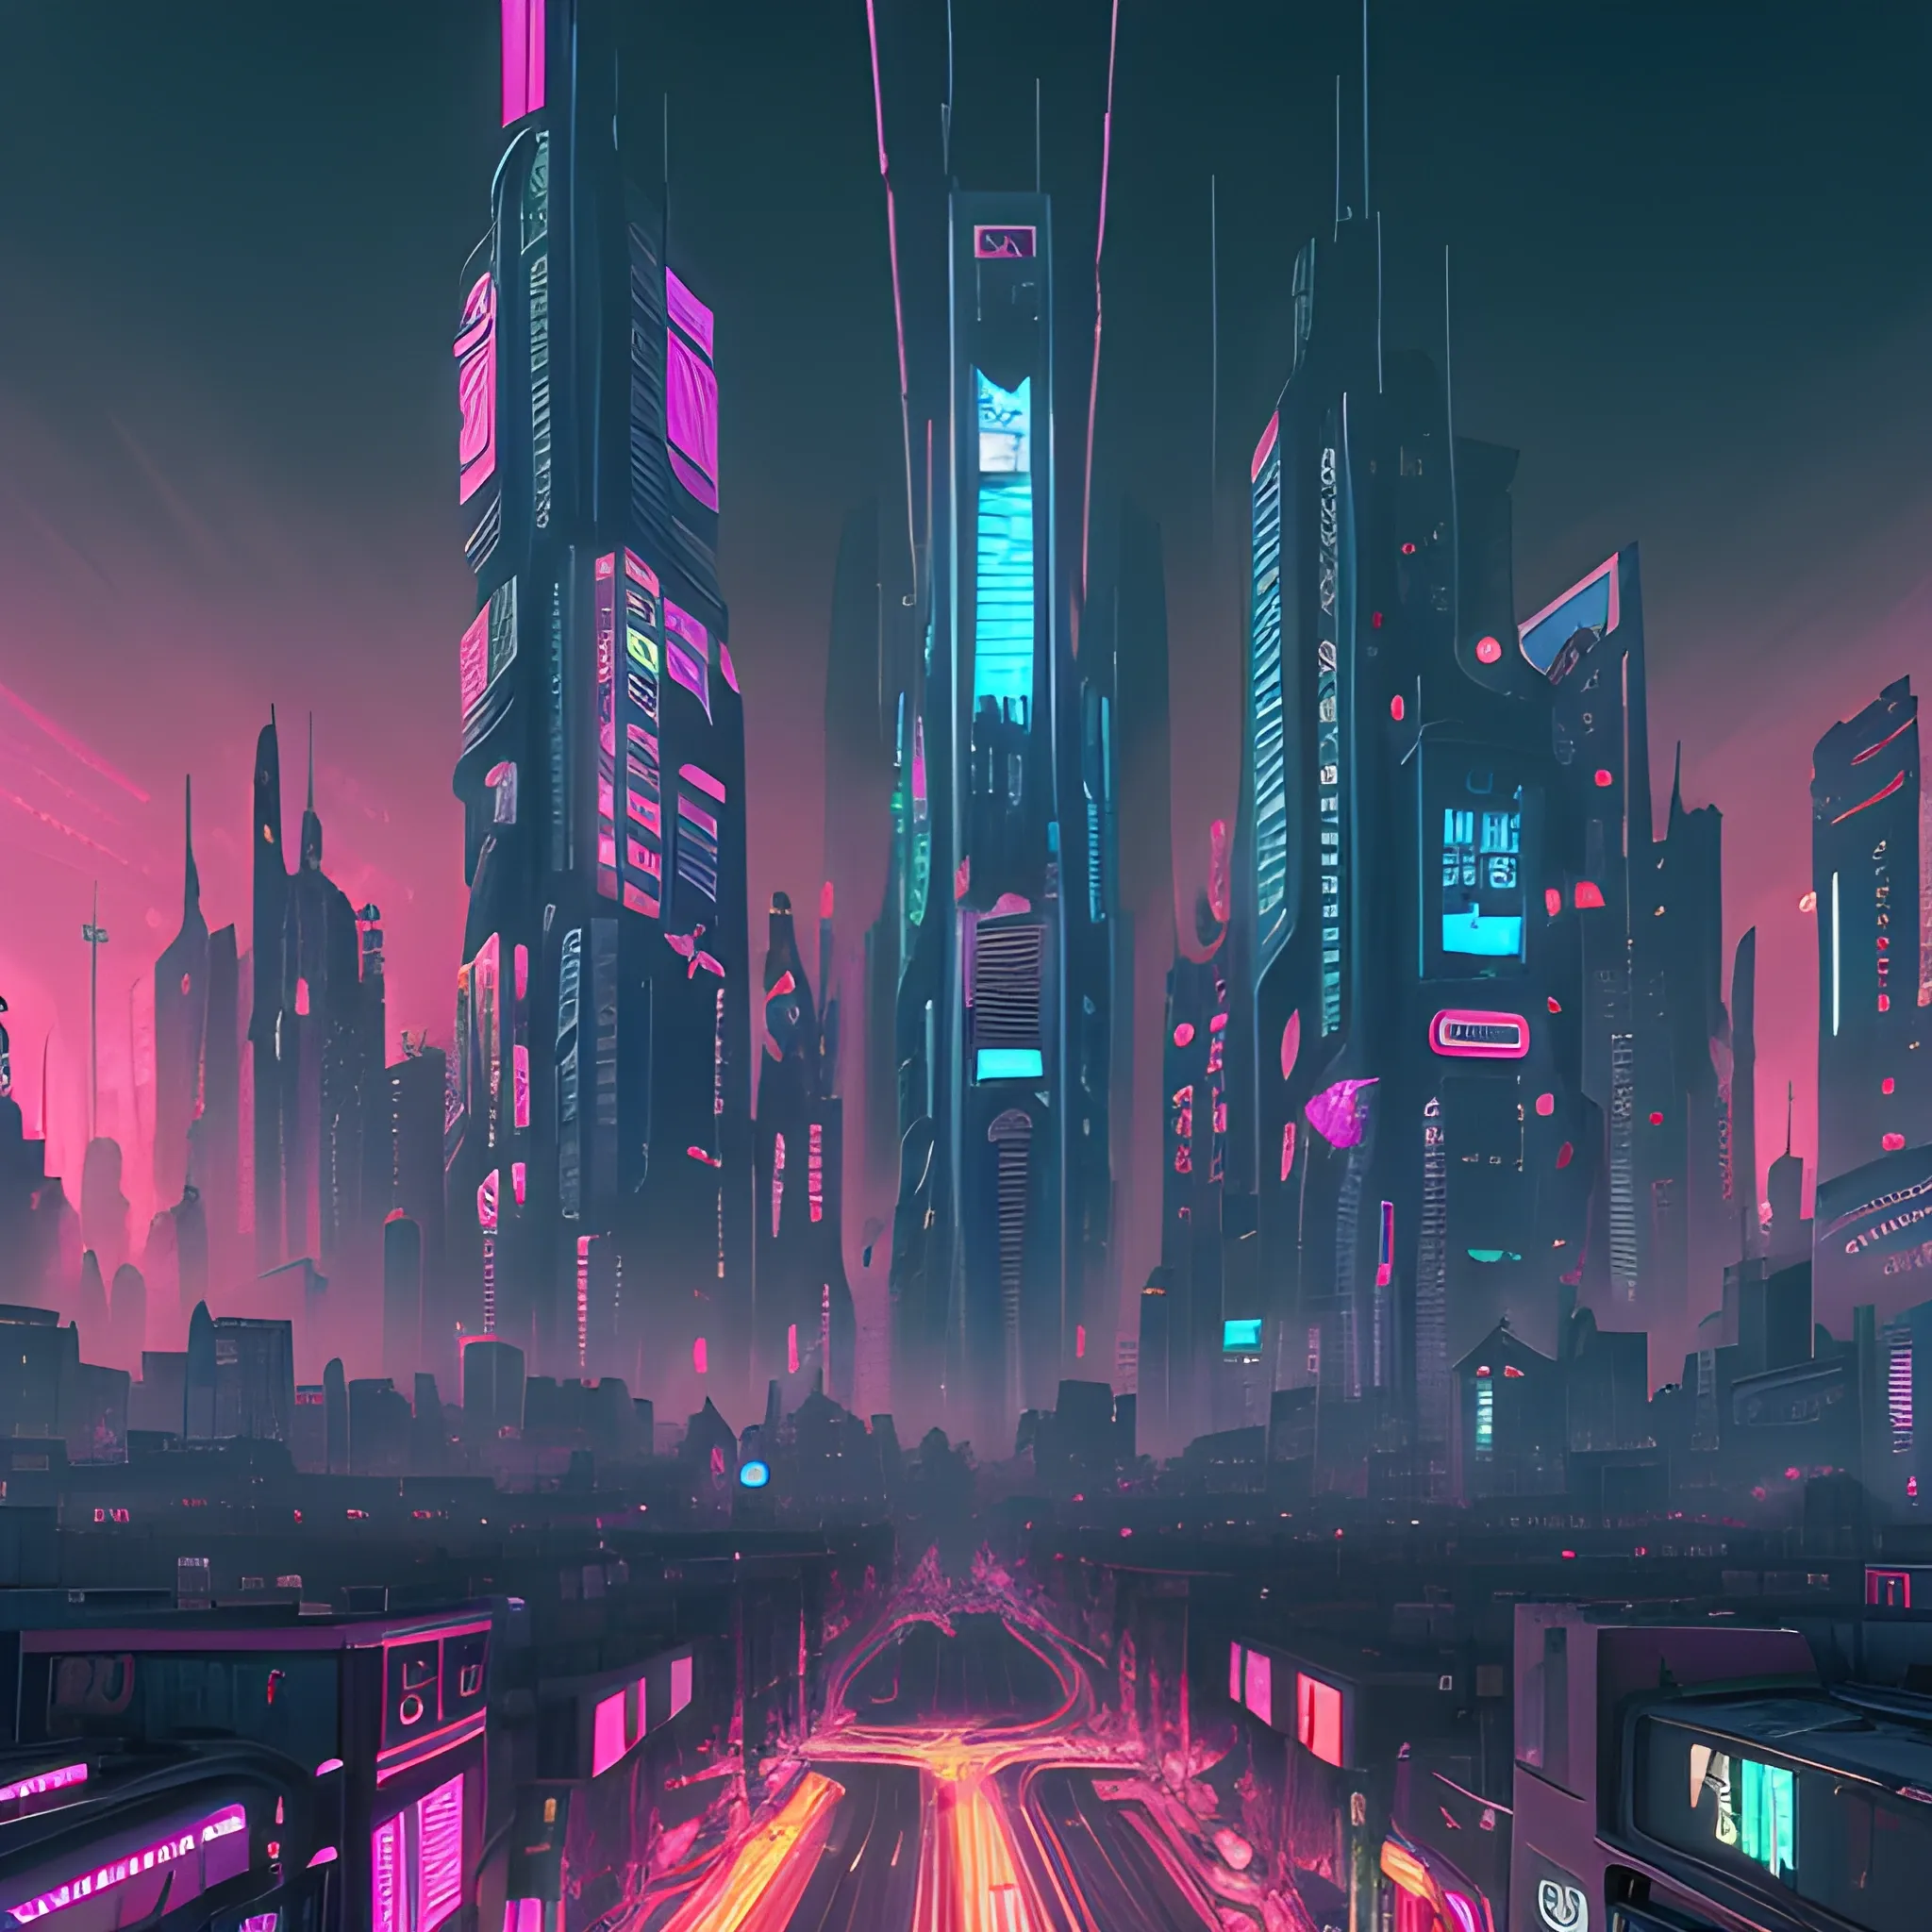 4k, beautiful, city, background of a cyberpunk by MAD DOG JONES, news, red, black colors, best illustration, no humans, no cars, vaporwave, realistic, dreamscape, incredible details, liminal space, highly detailed, cinematic ,rim lighting, trending on Behance HD

